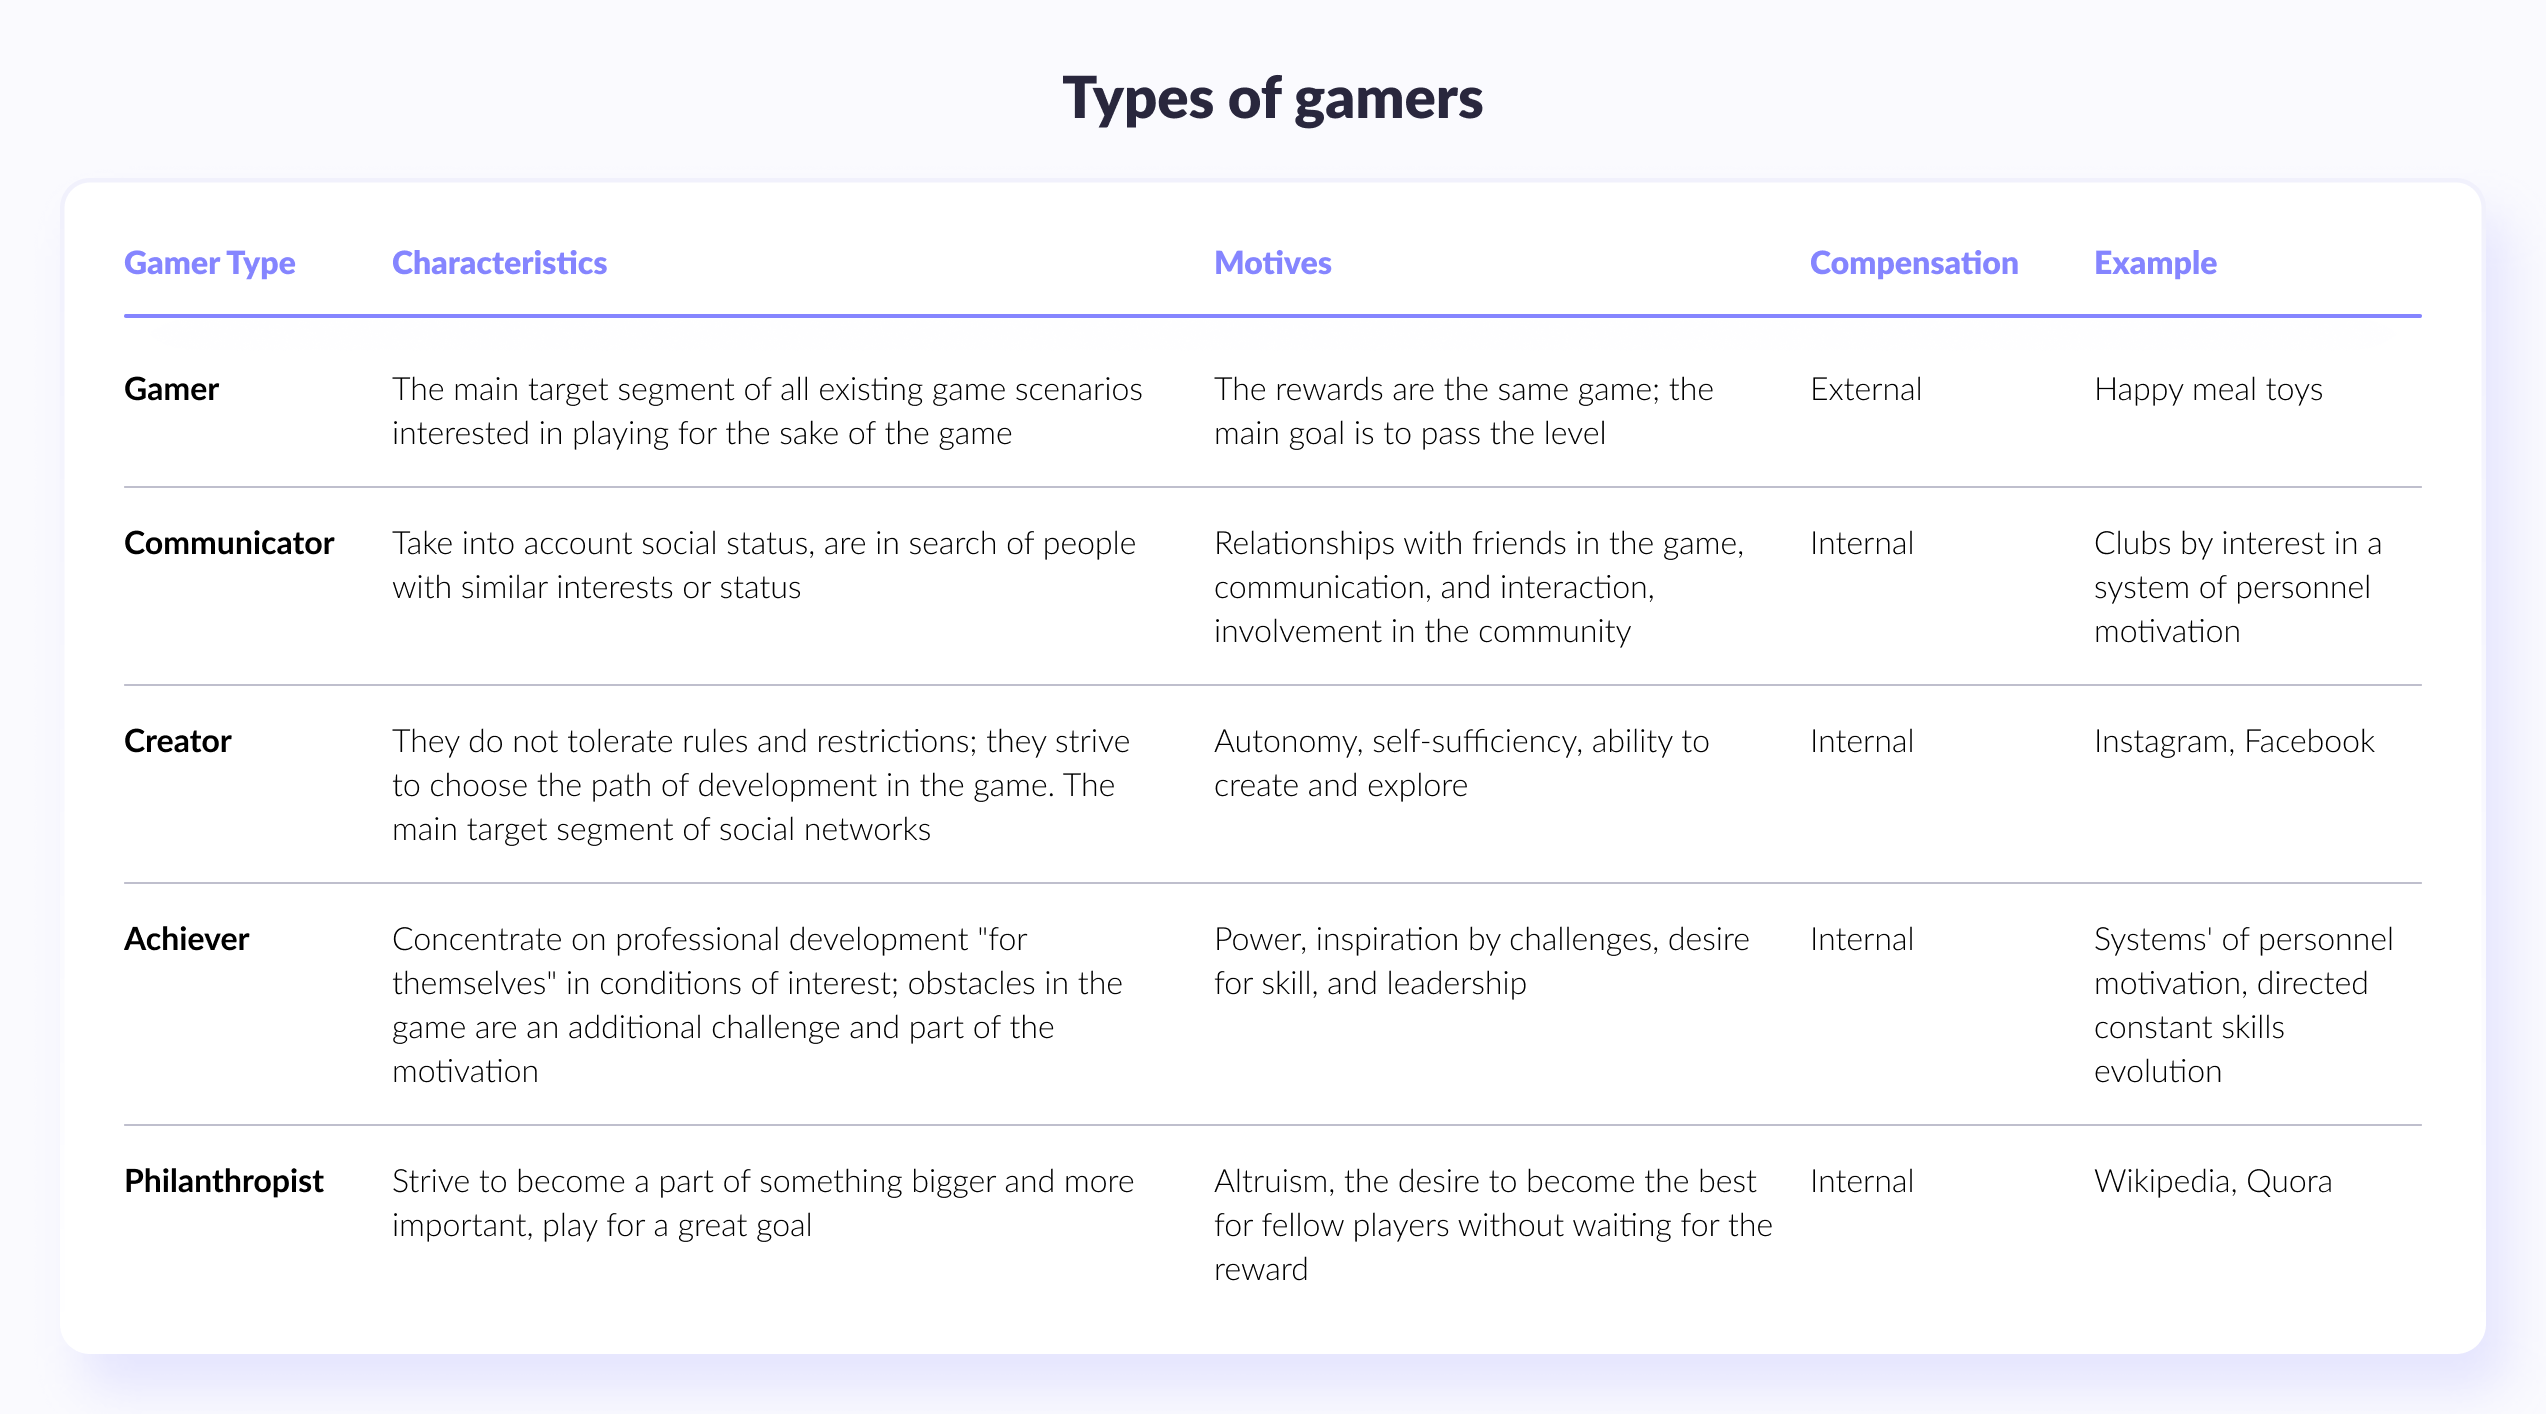 Types of gamers